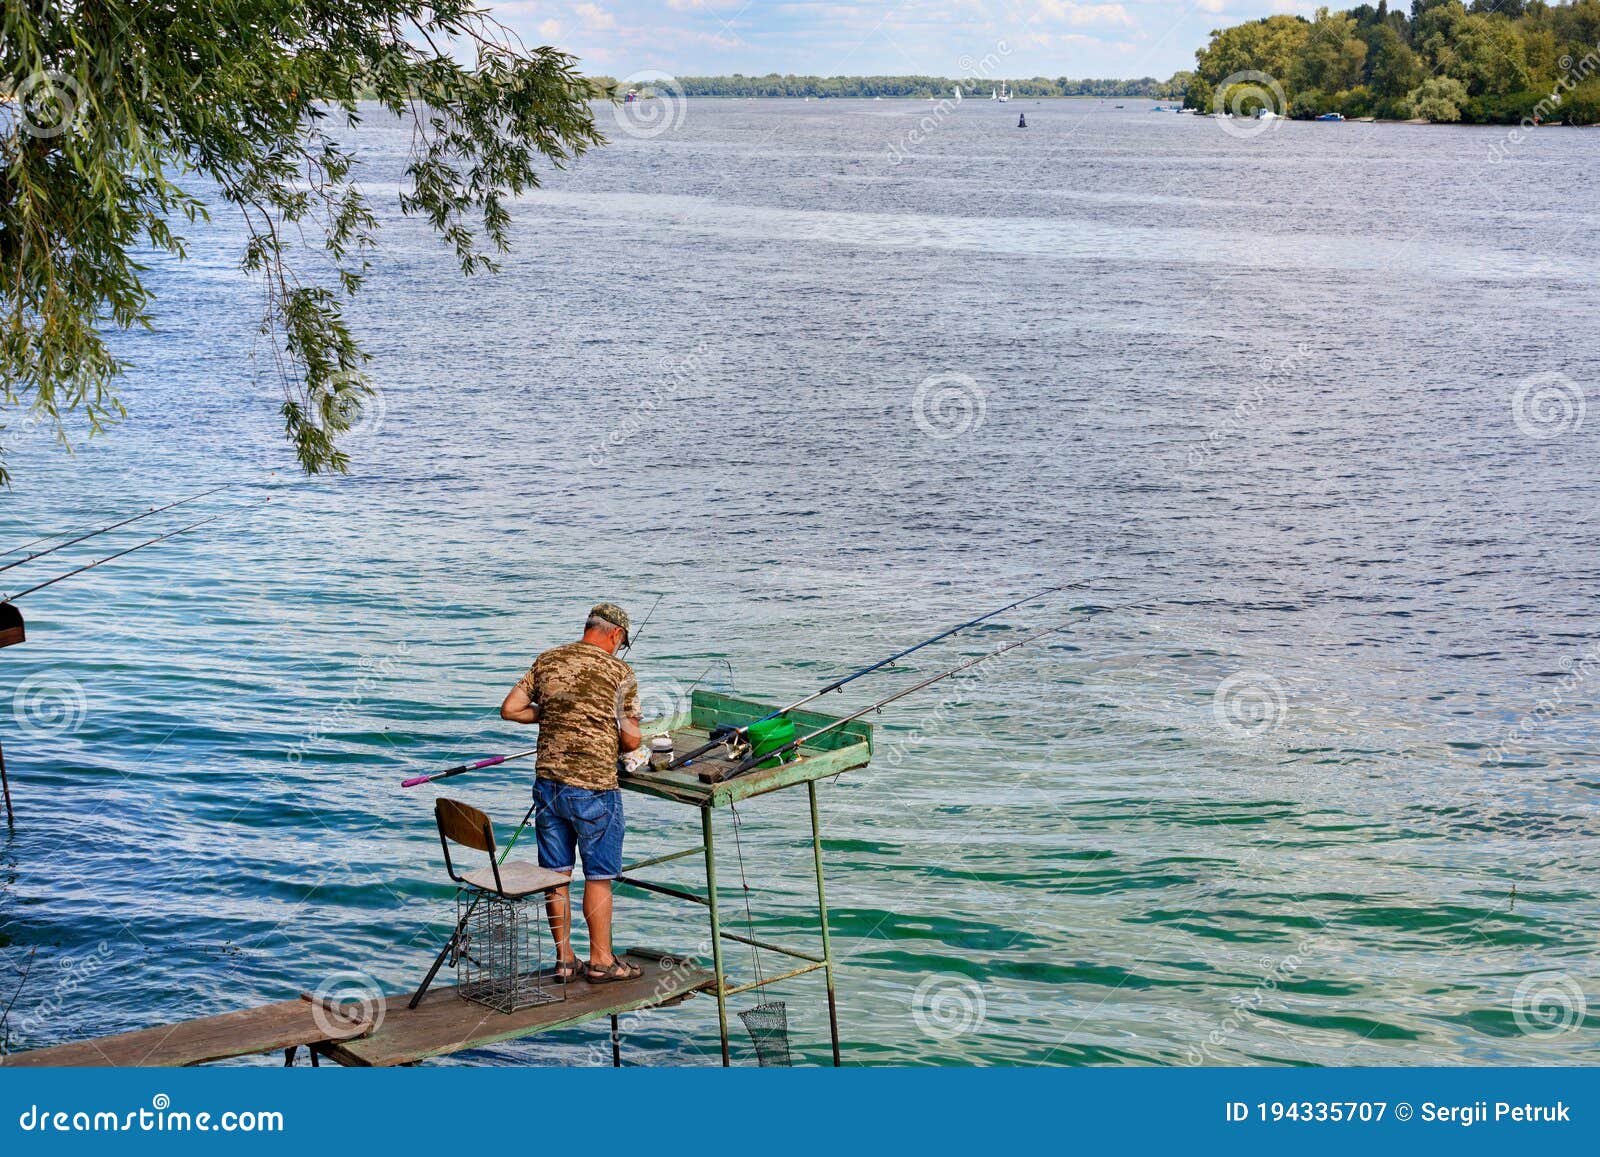 A Fisherman Catches Fish with Fishing Rods on the River Bank, Standing on a  Wooden Platform Stock Image - Image of green, equipment: 194335707